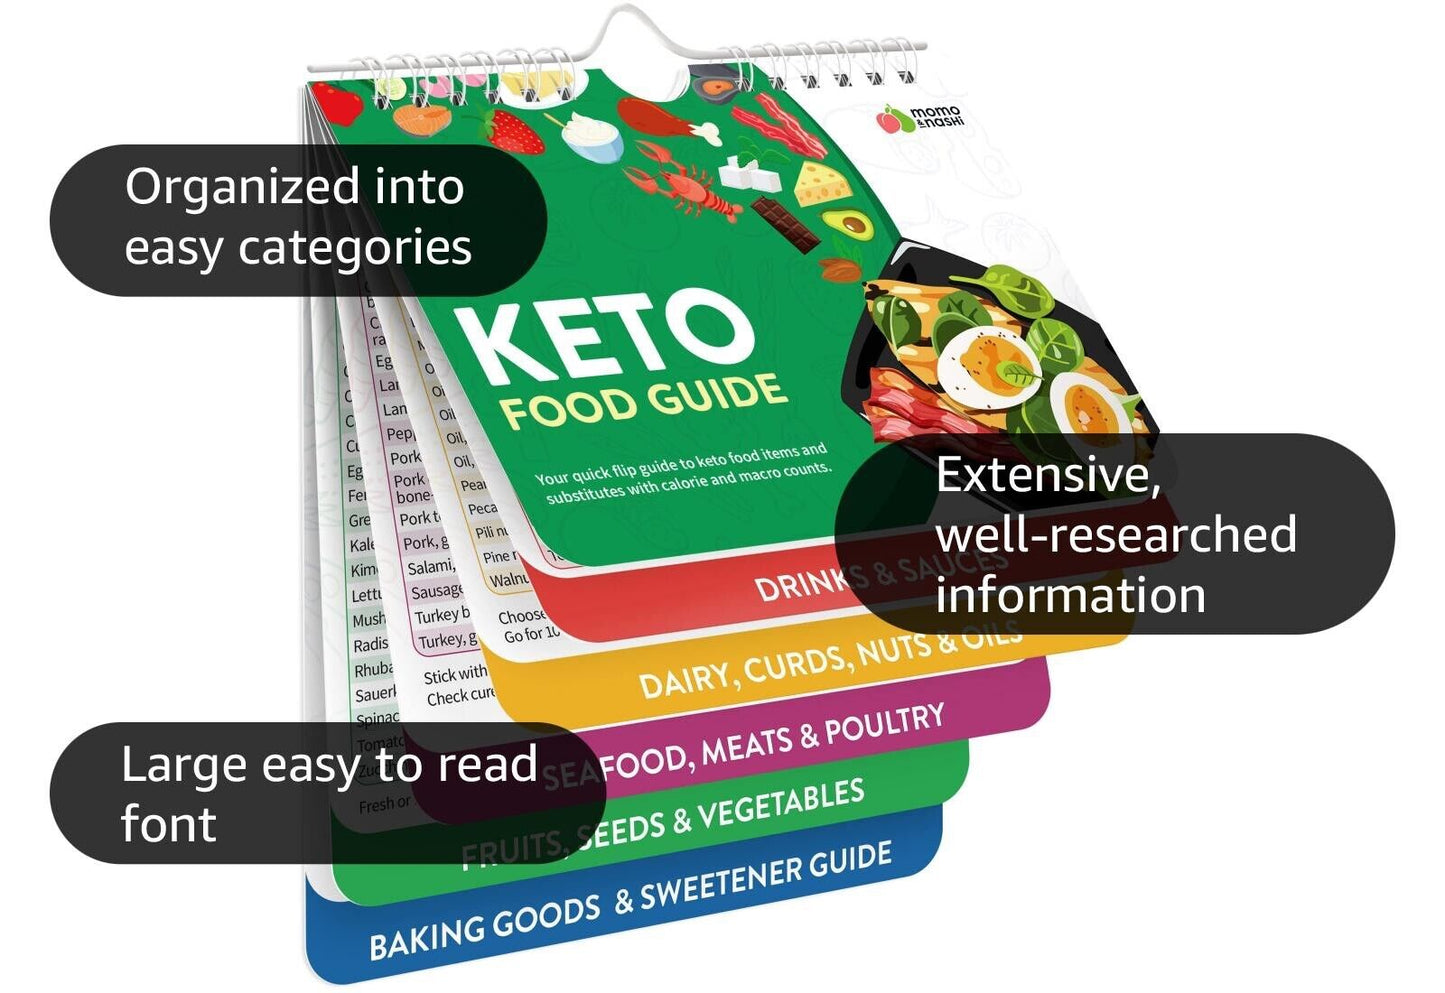 Keto Cheat Sheet Magnets Booklet - Keto Food Guide - New with open box